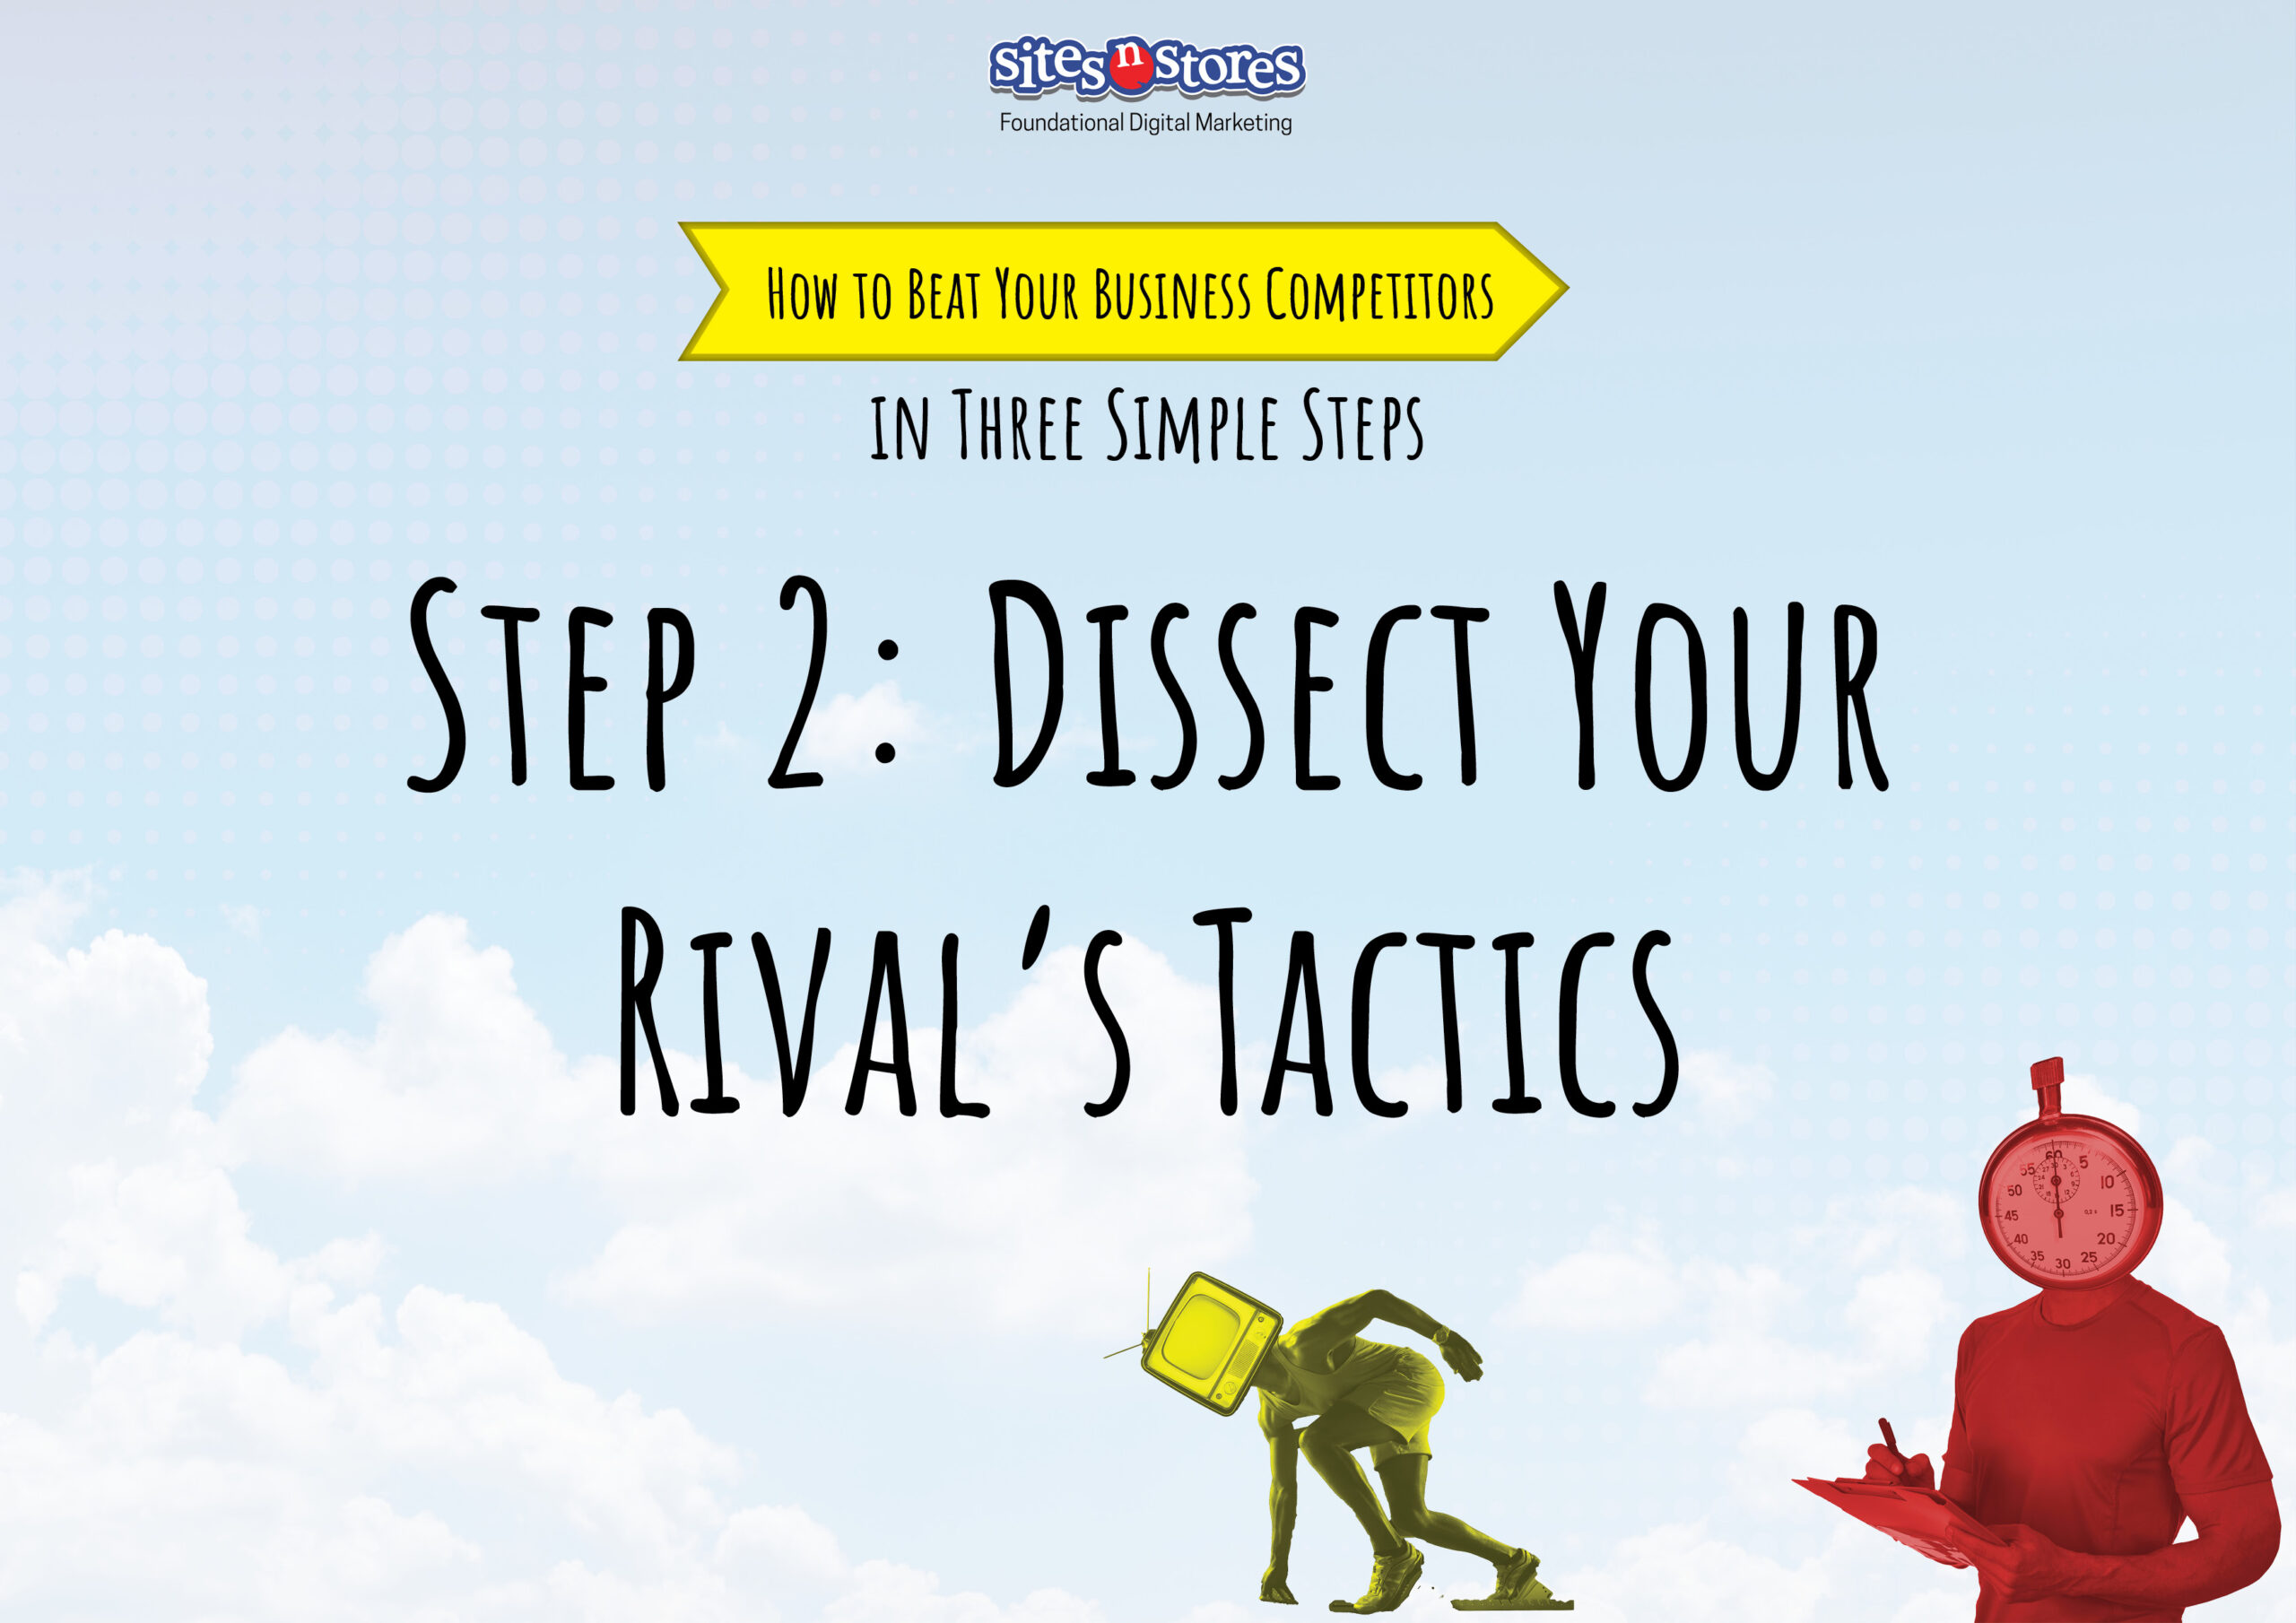 Step 2: Dissect Your Rival's Tactics